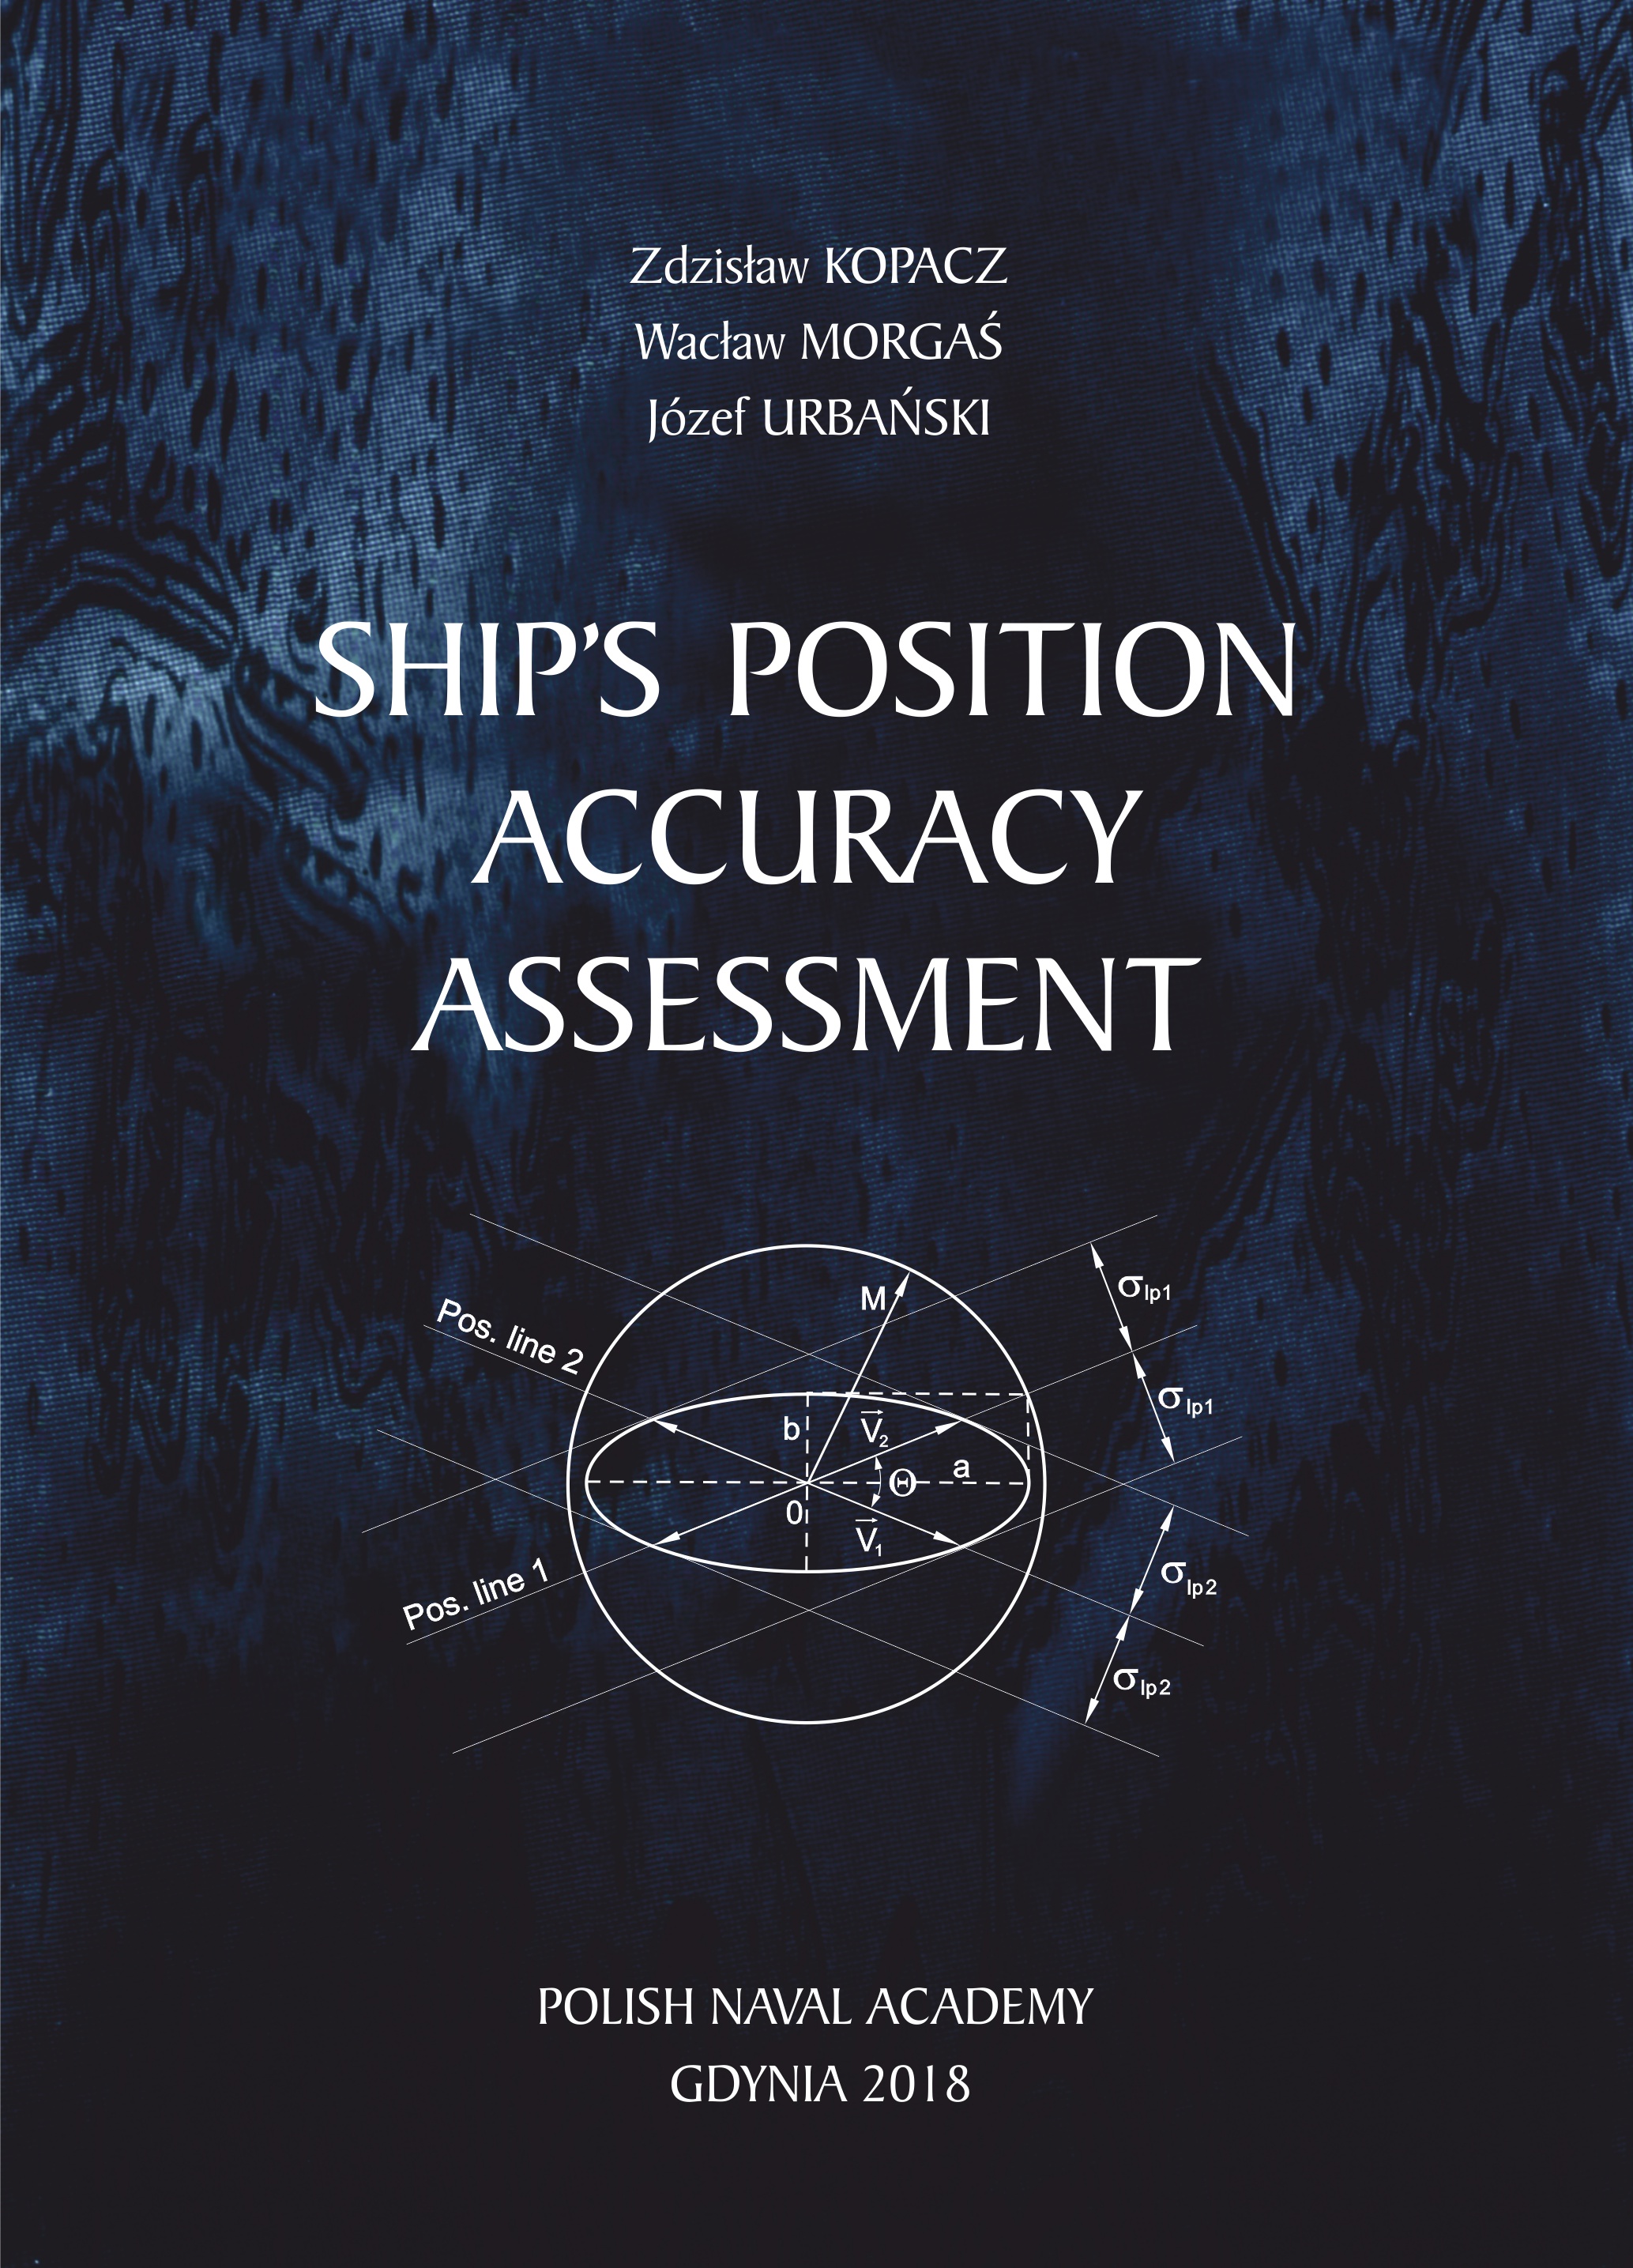 SHIPS POSITION ACCURACY ASSESSMENT